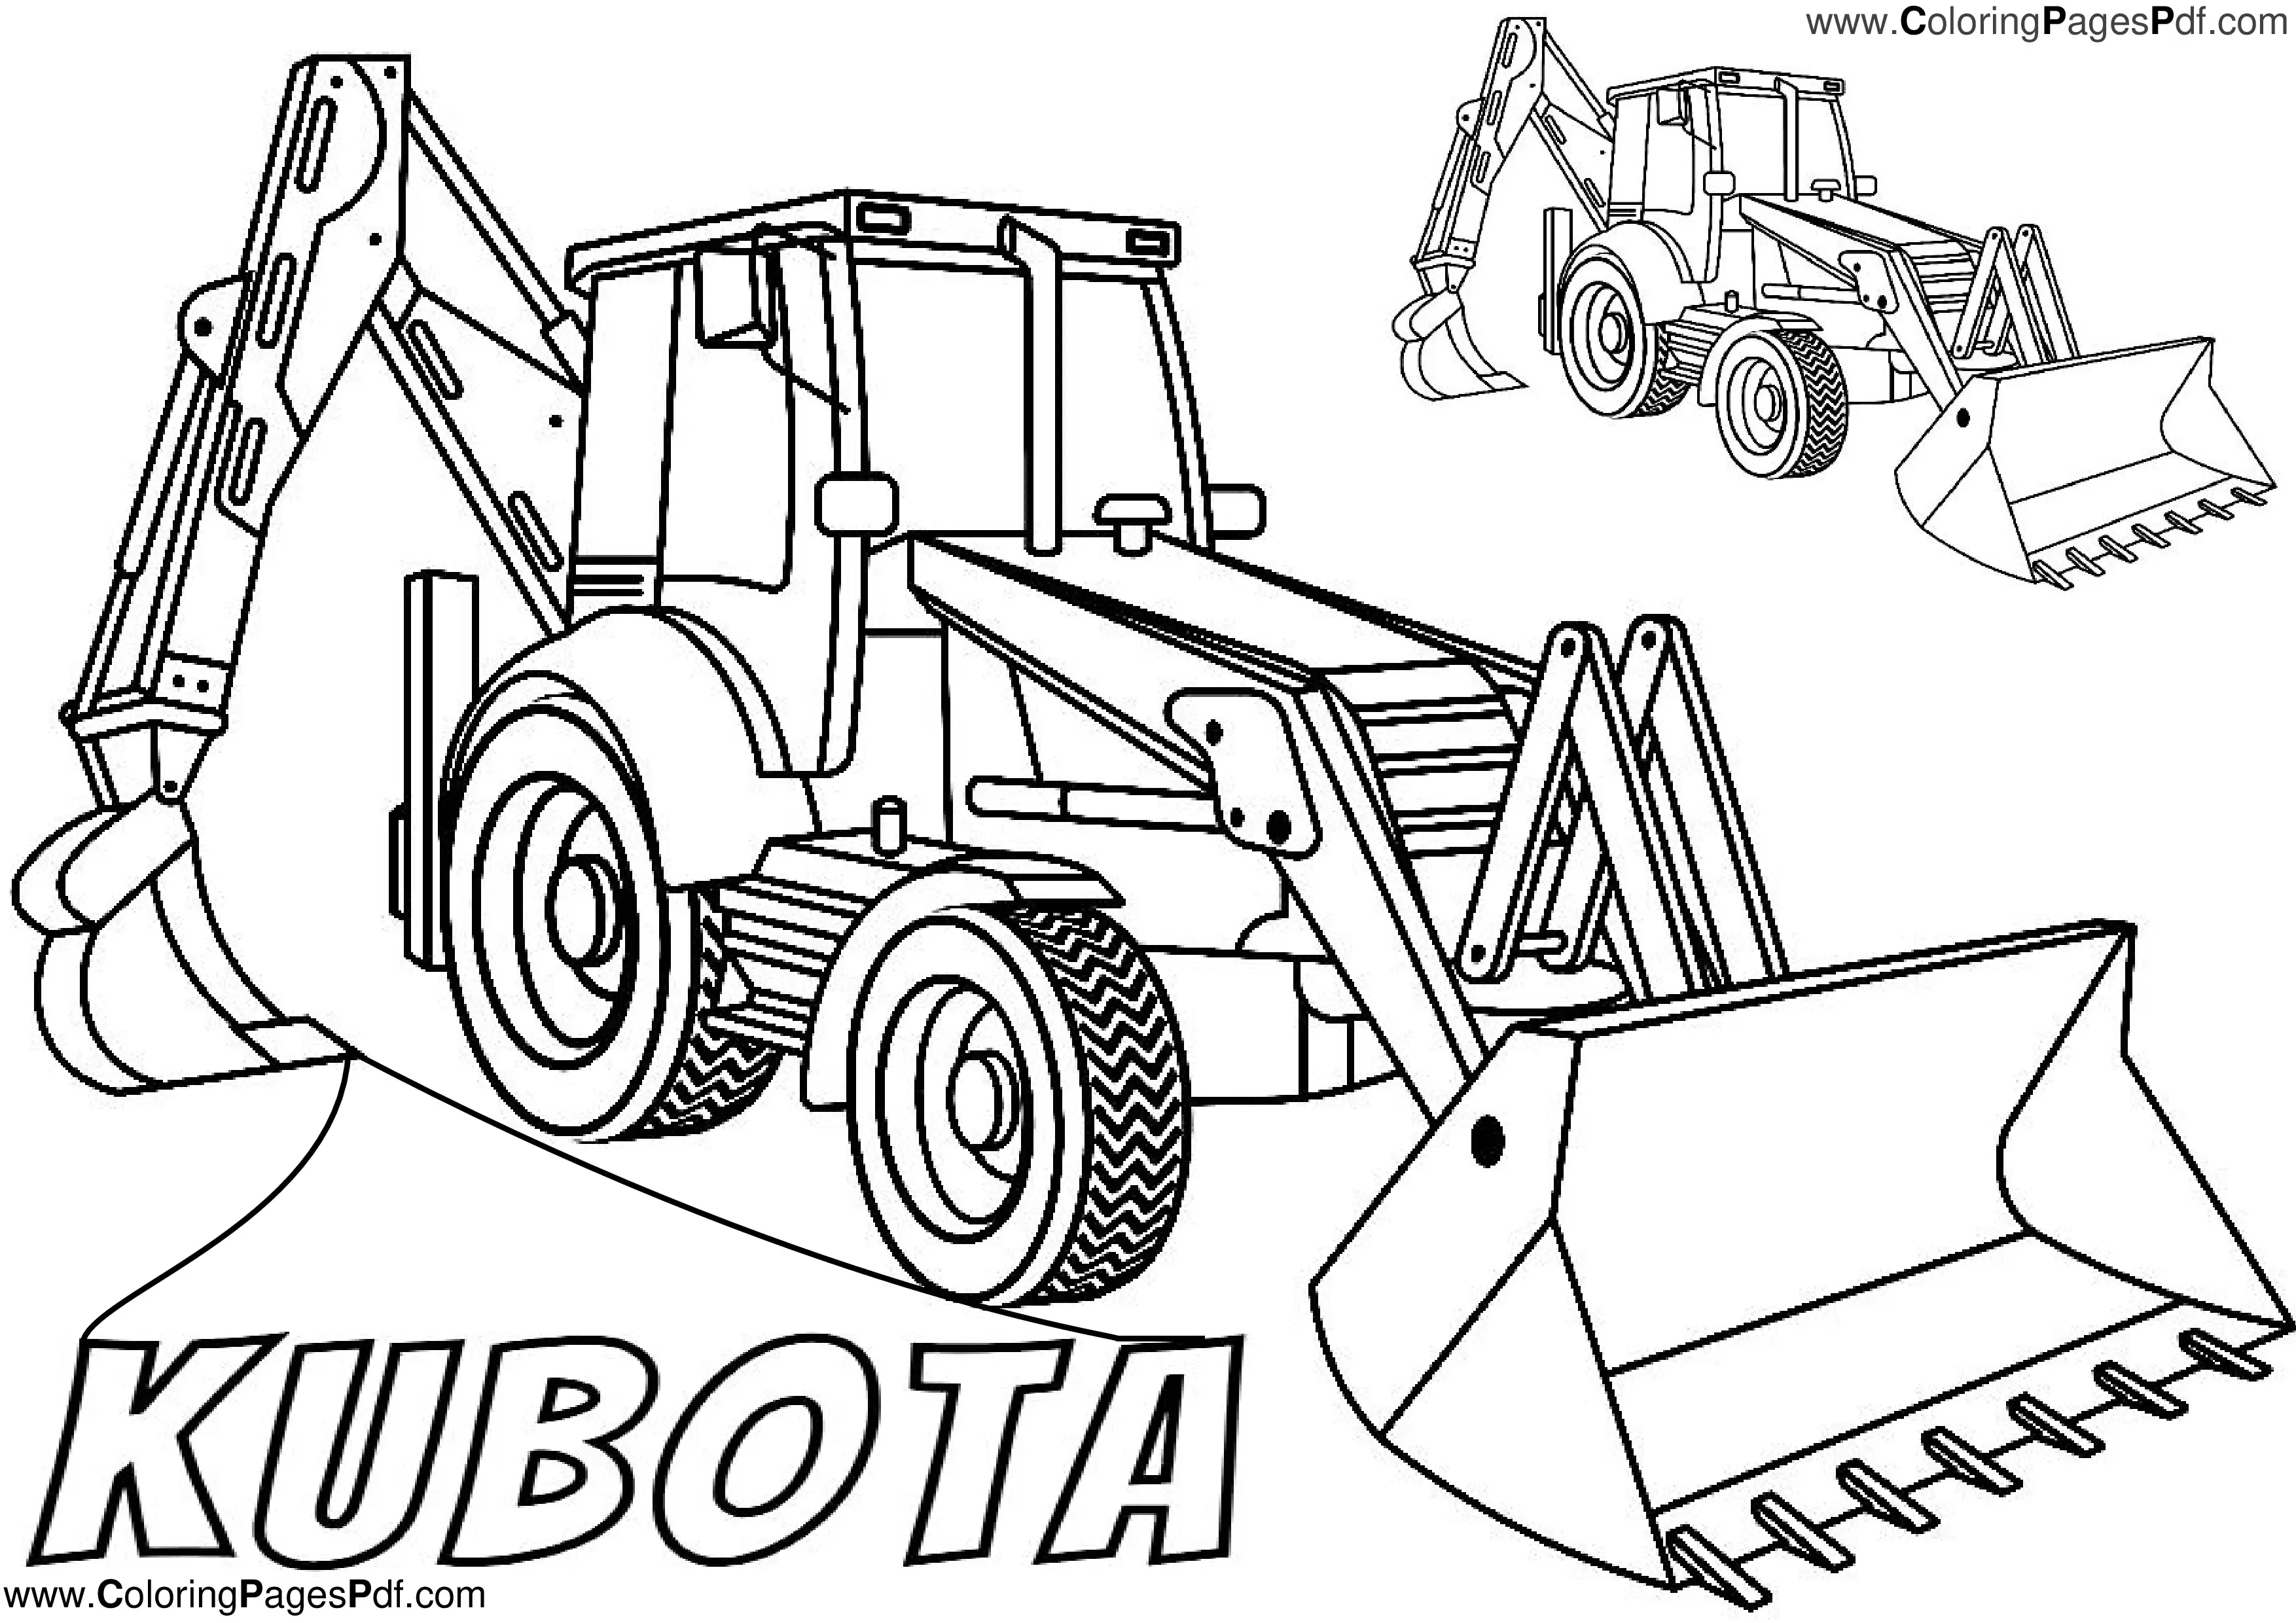 Kubota Tractor Coloring Pages